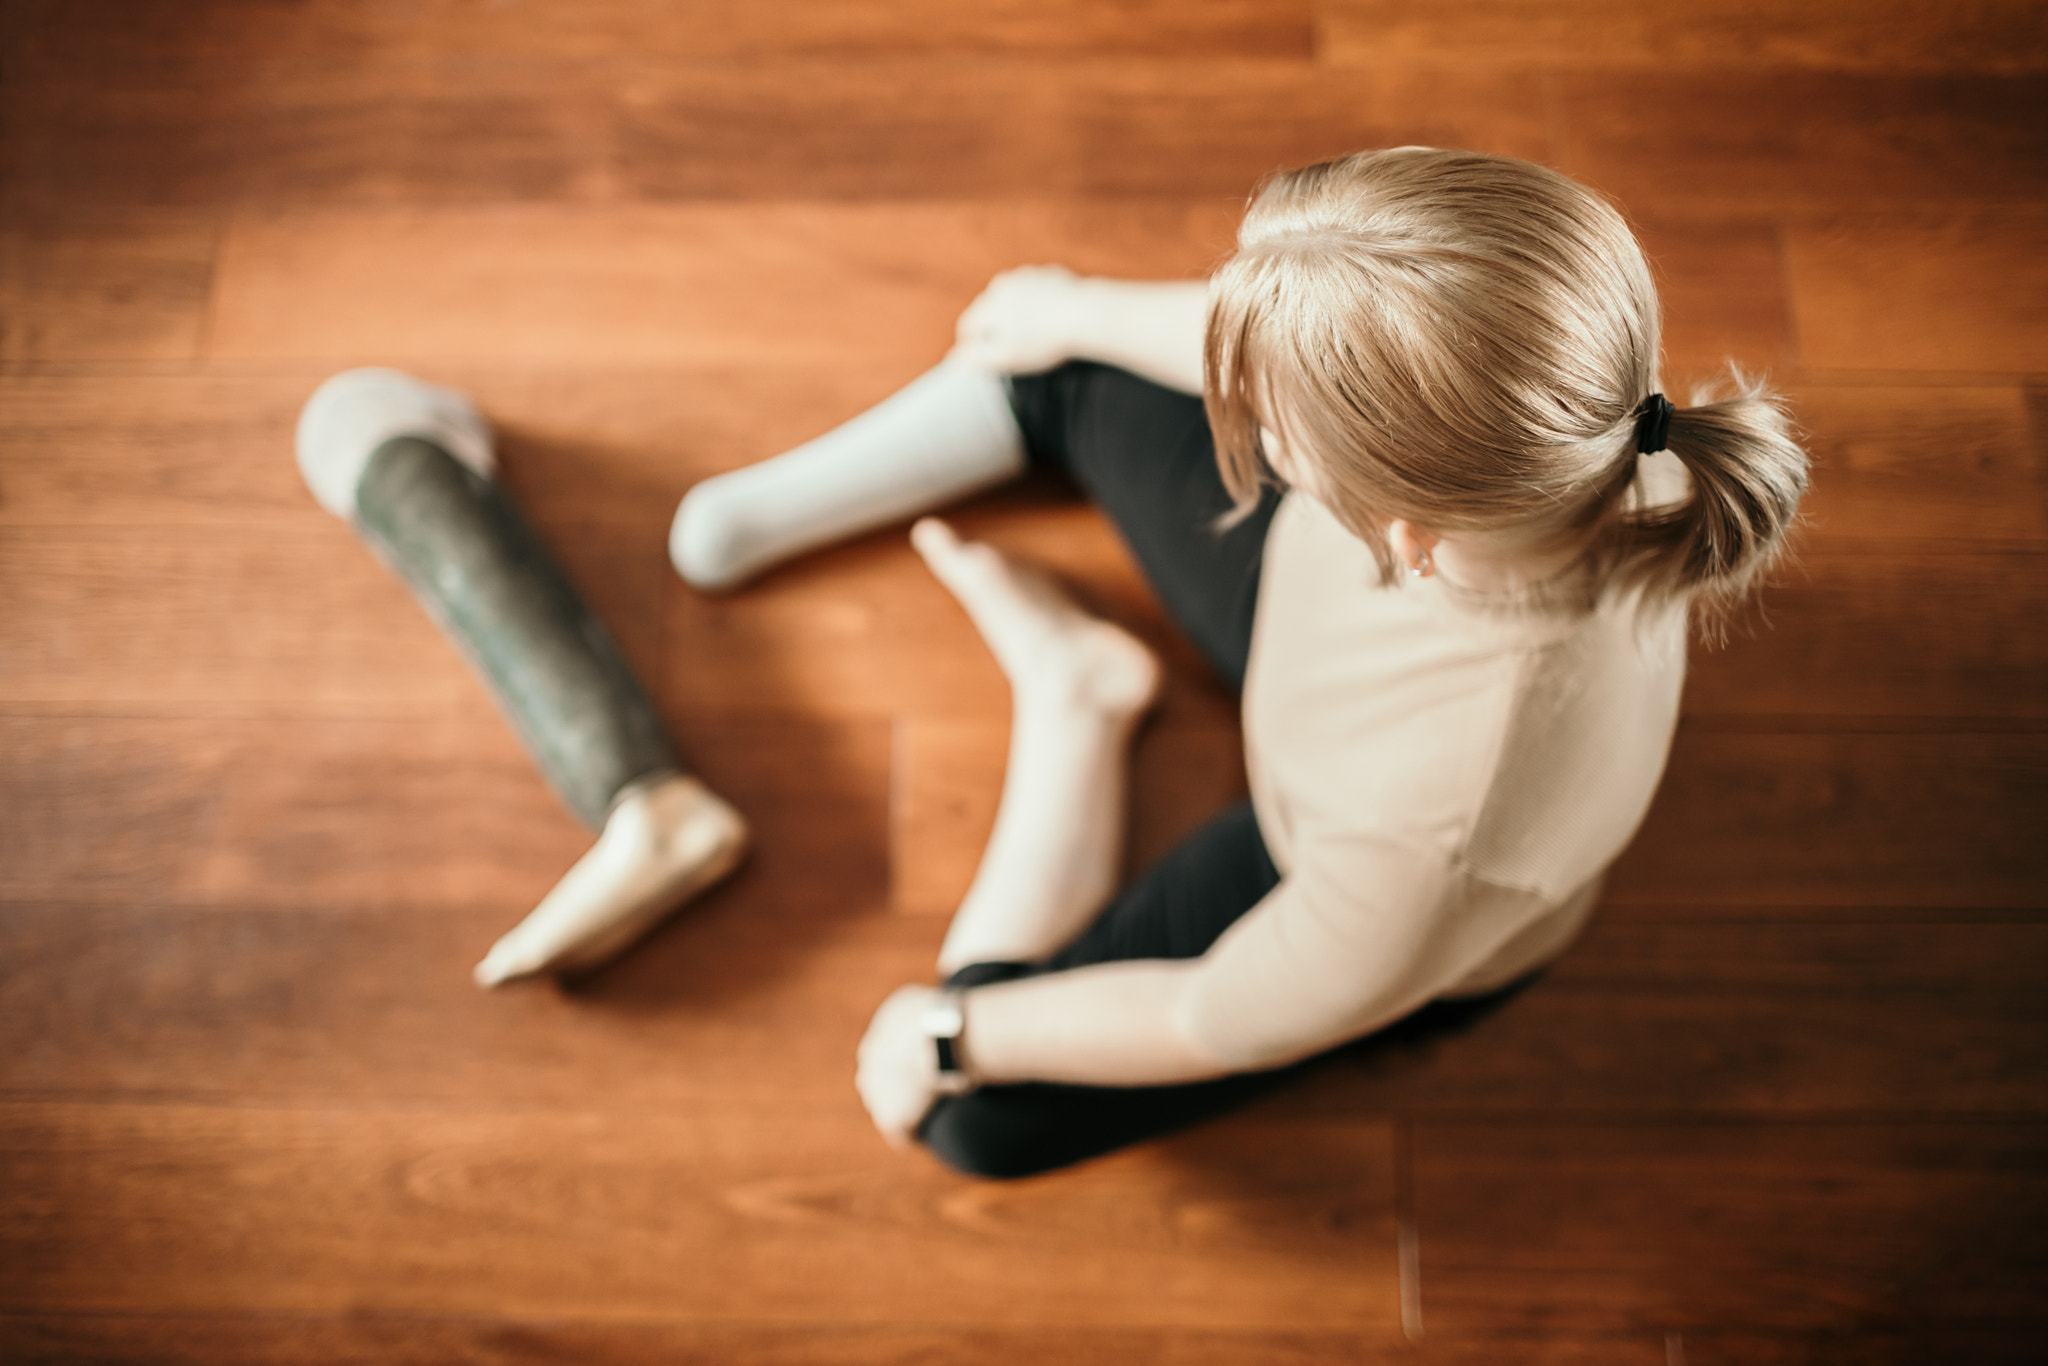 Blonde Amputee Sitting on Floor with Prosthesis